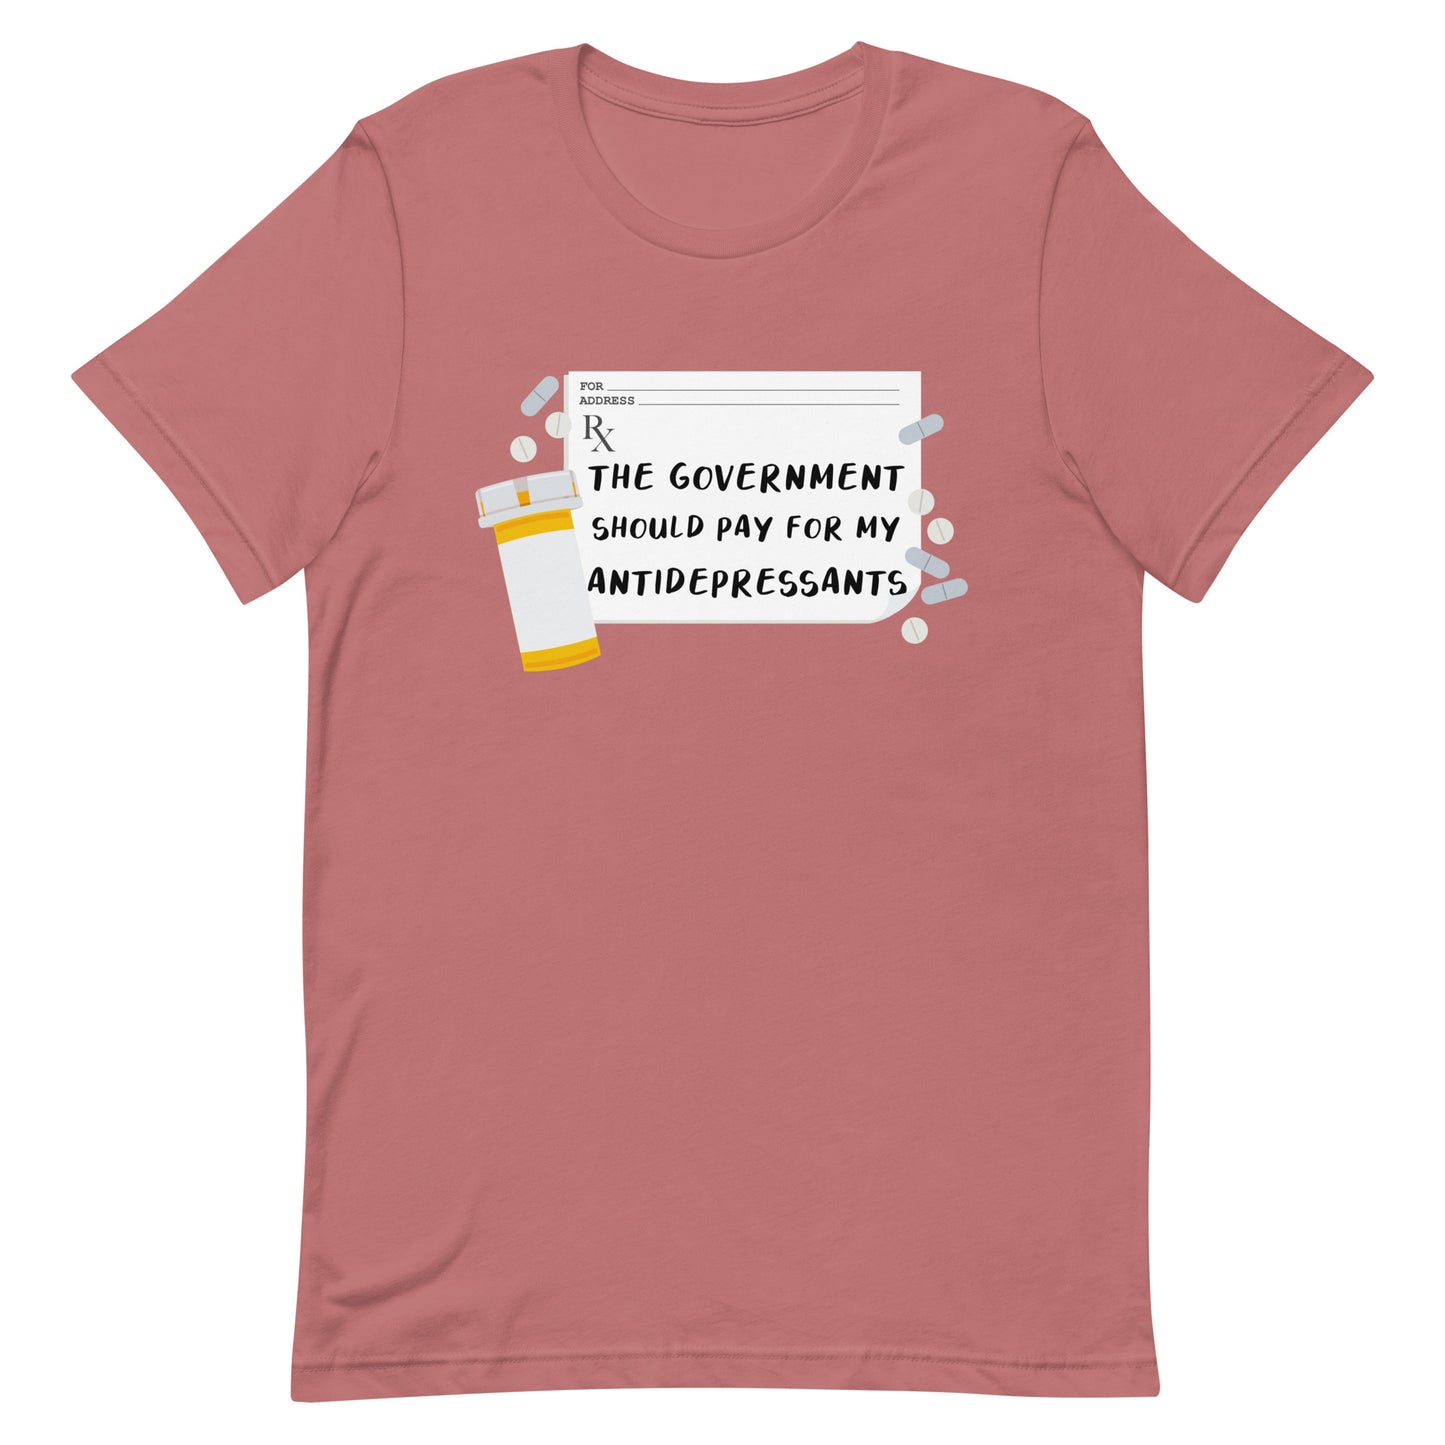 A dusky pink crewneck t-shirt featuring an image of a subscription page with text that reads "The government should pay for my antidepressants". Pills and an empty orange pill bottle surround the RX sheet.